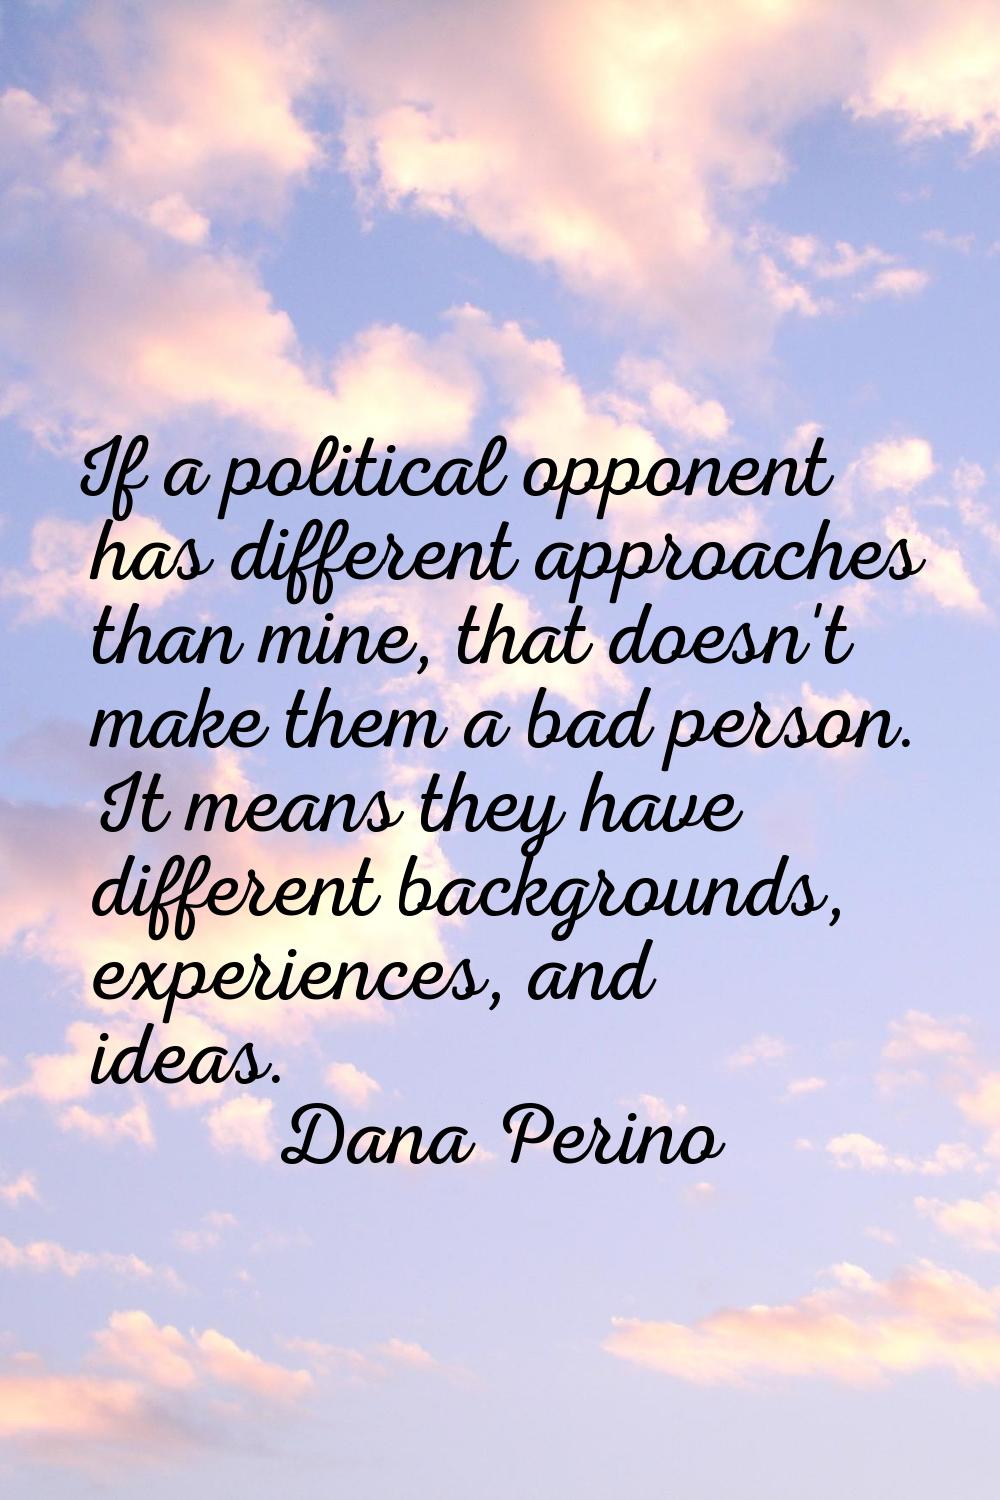 If a political opponent has different approaches than mine, that doesn't make them a bad person. It